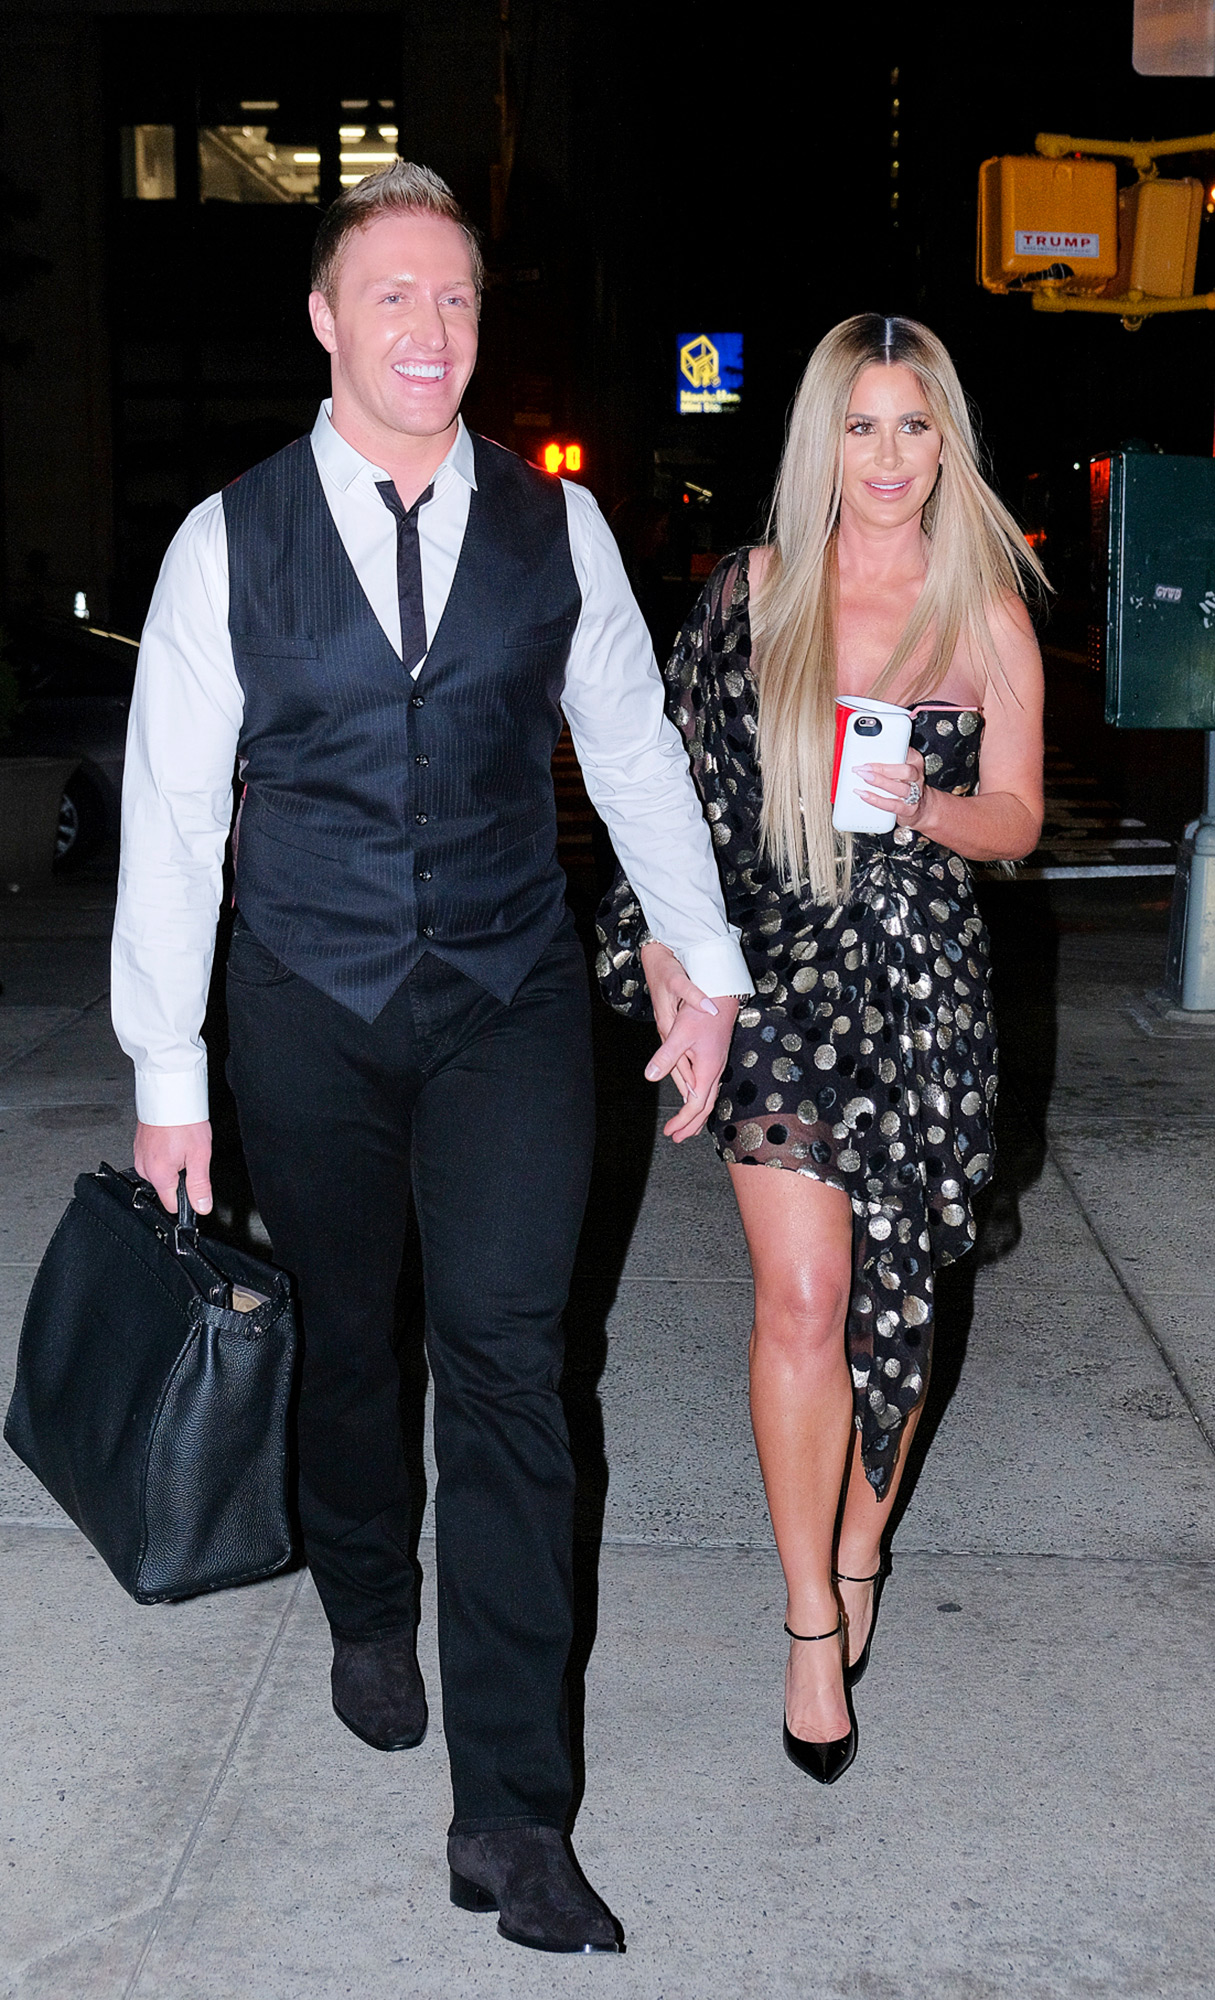 What Kim Zolciak and Kroy Biermann Have Said About His Parents